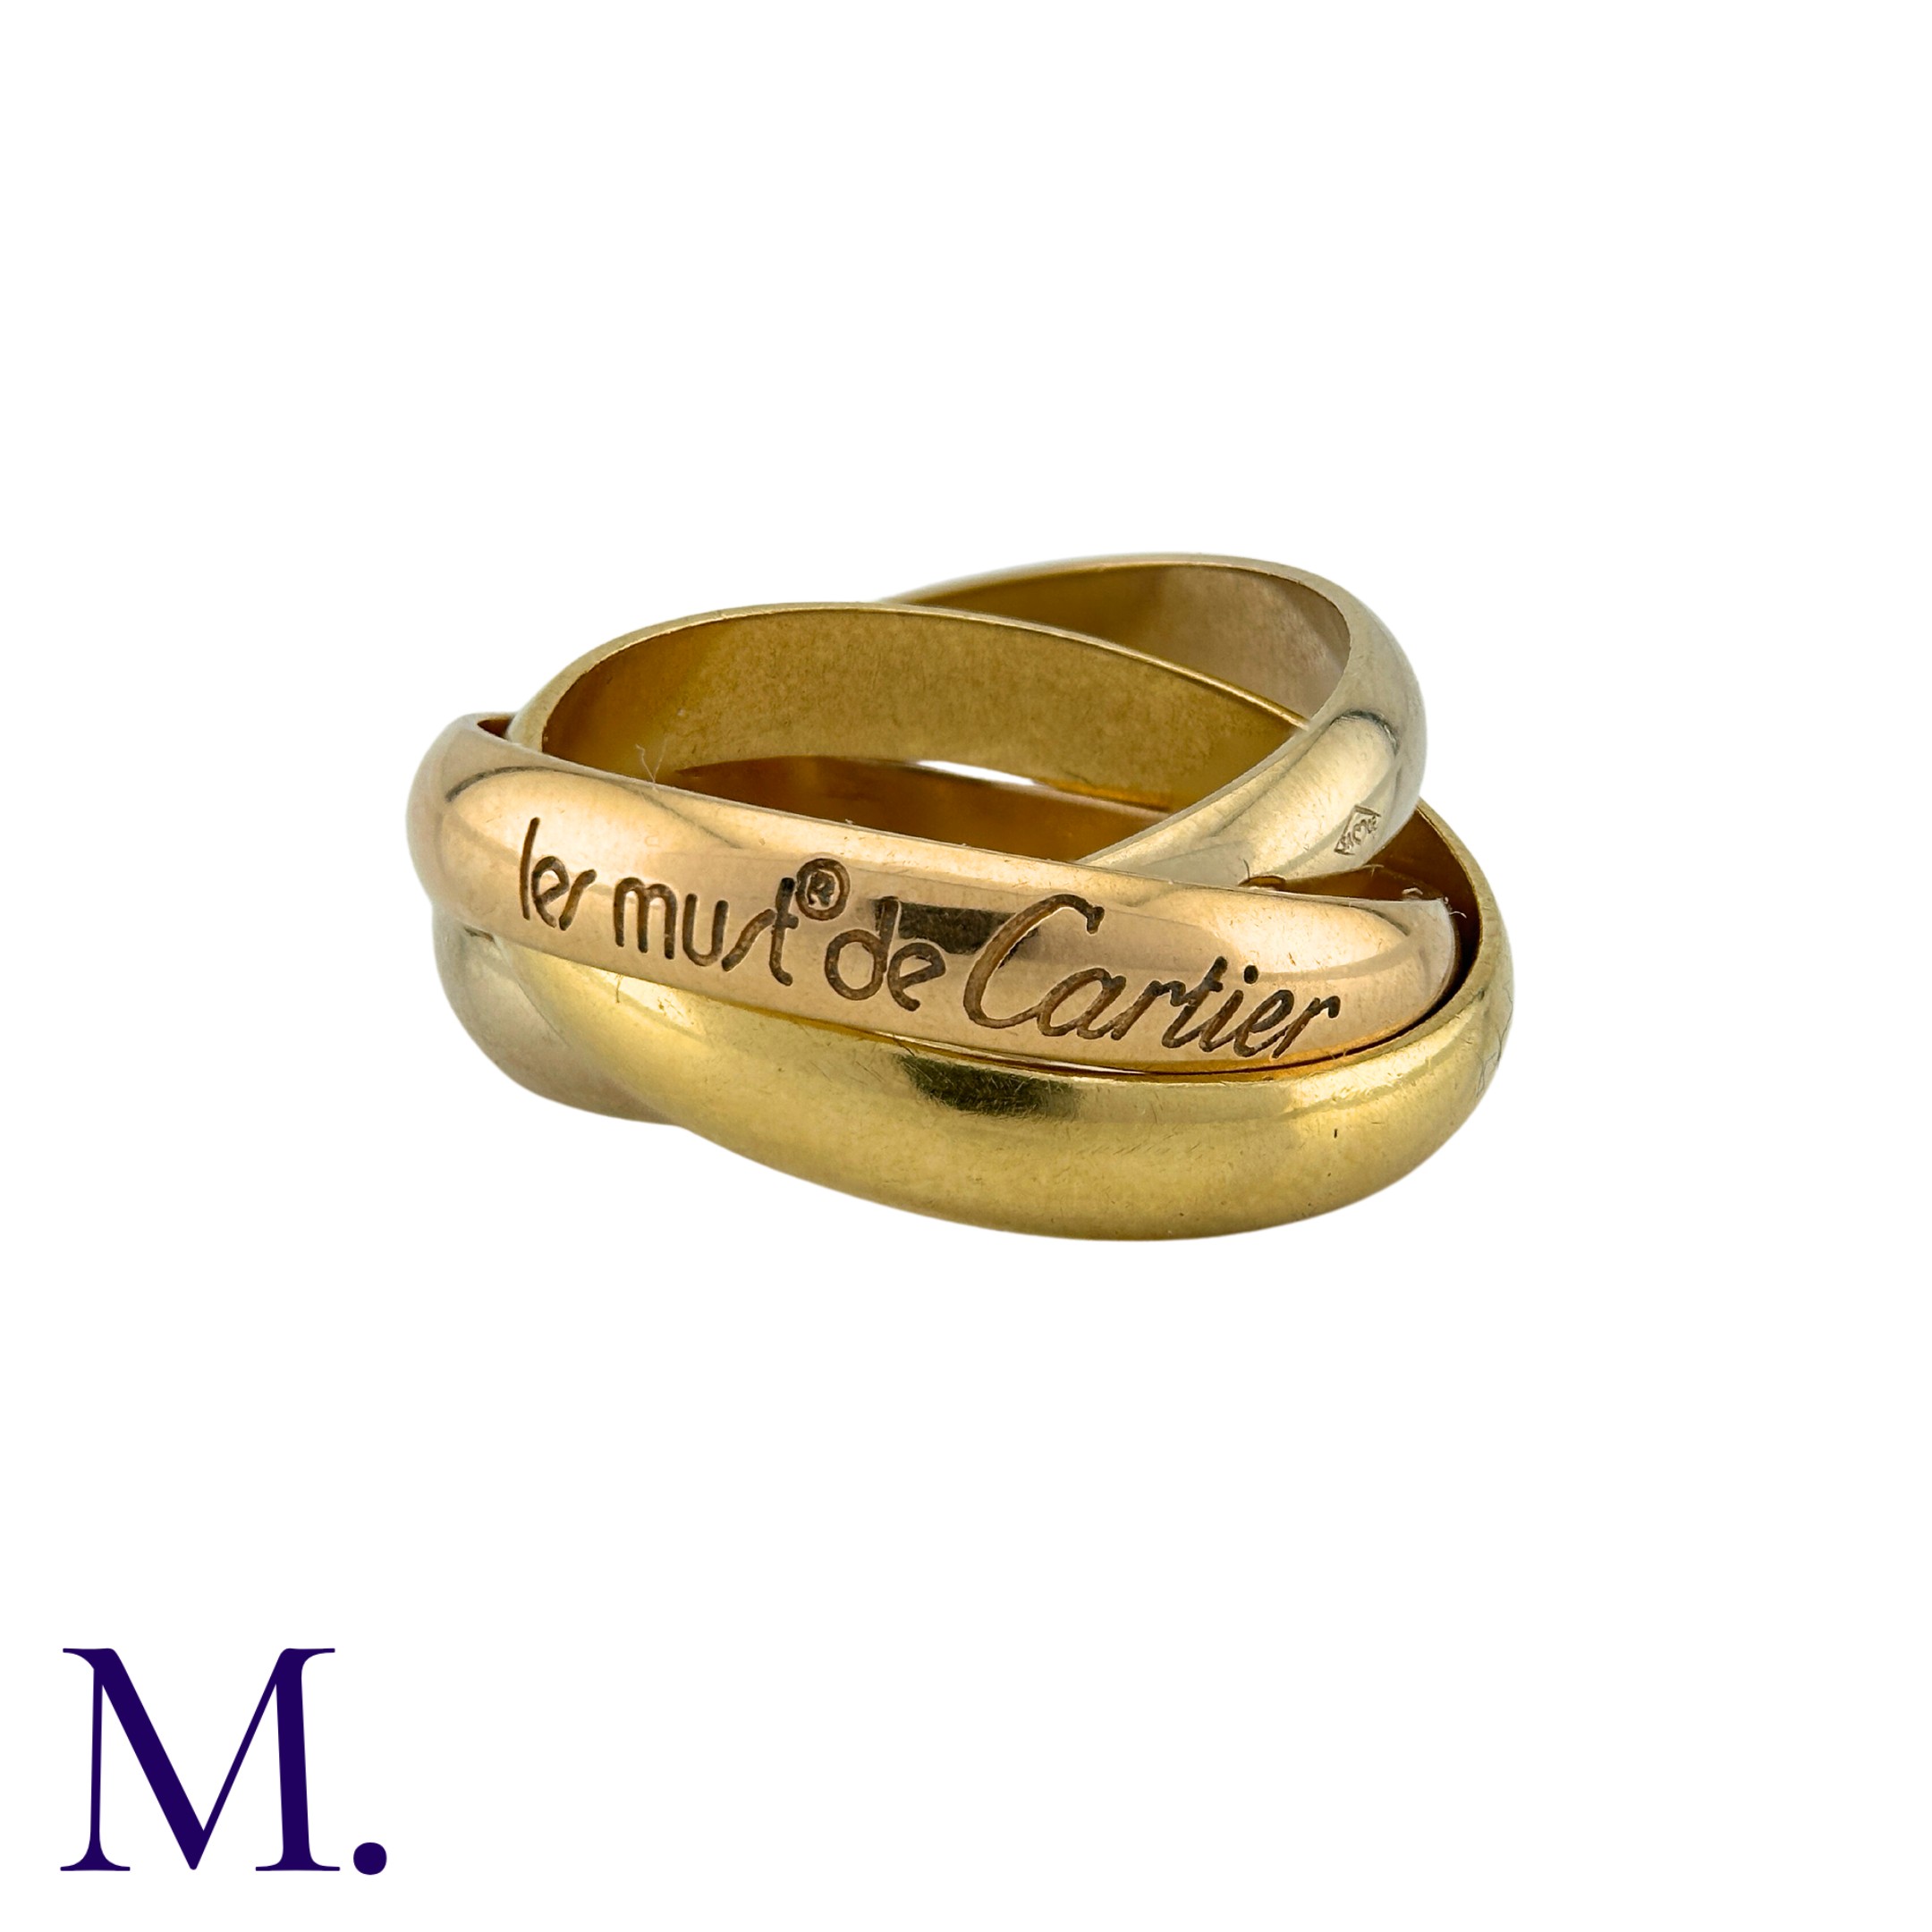 CARTIER. A Cartier Trinity Ring in 18K rose, white and yellow gold. Engraved 'Les Must de Cartier'